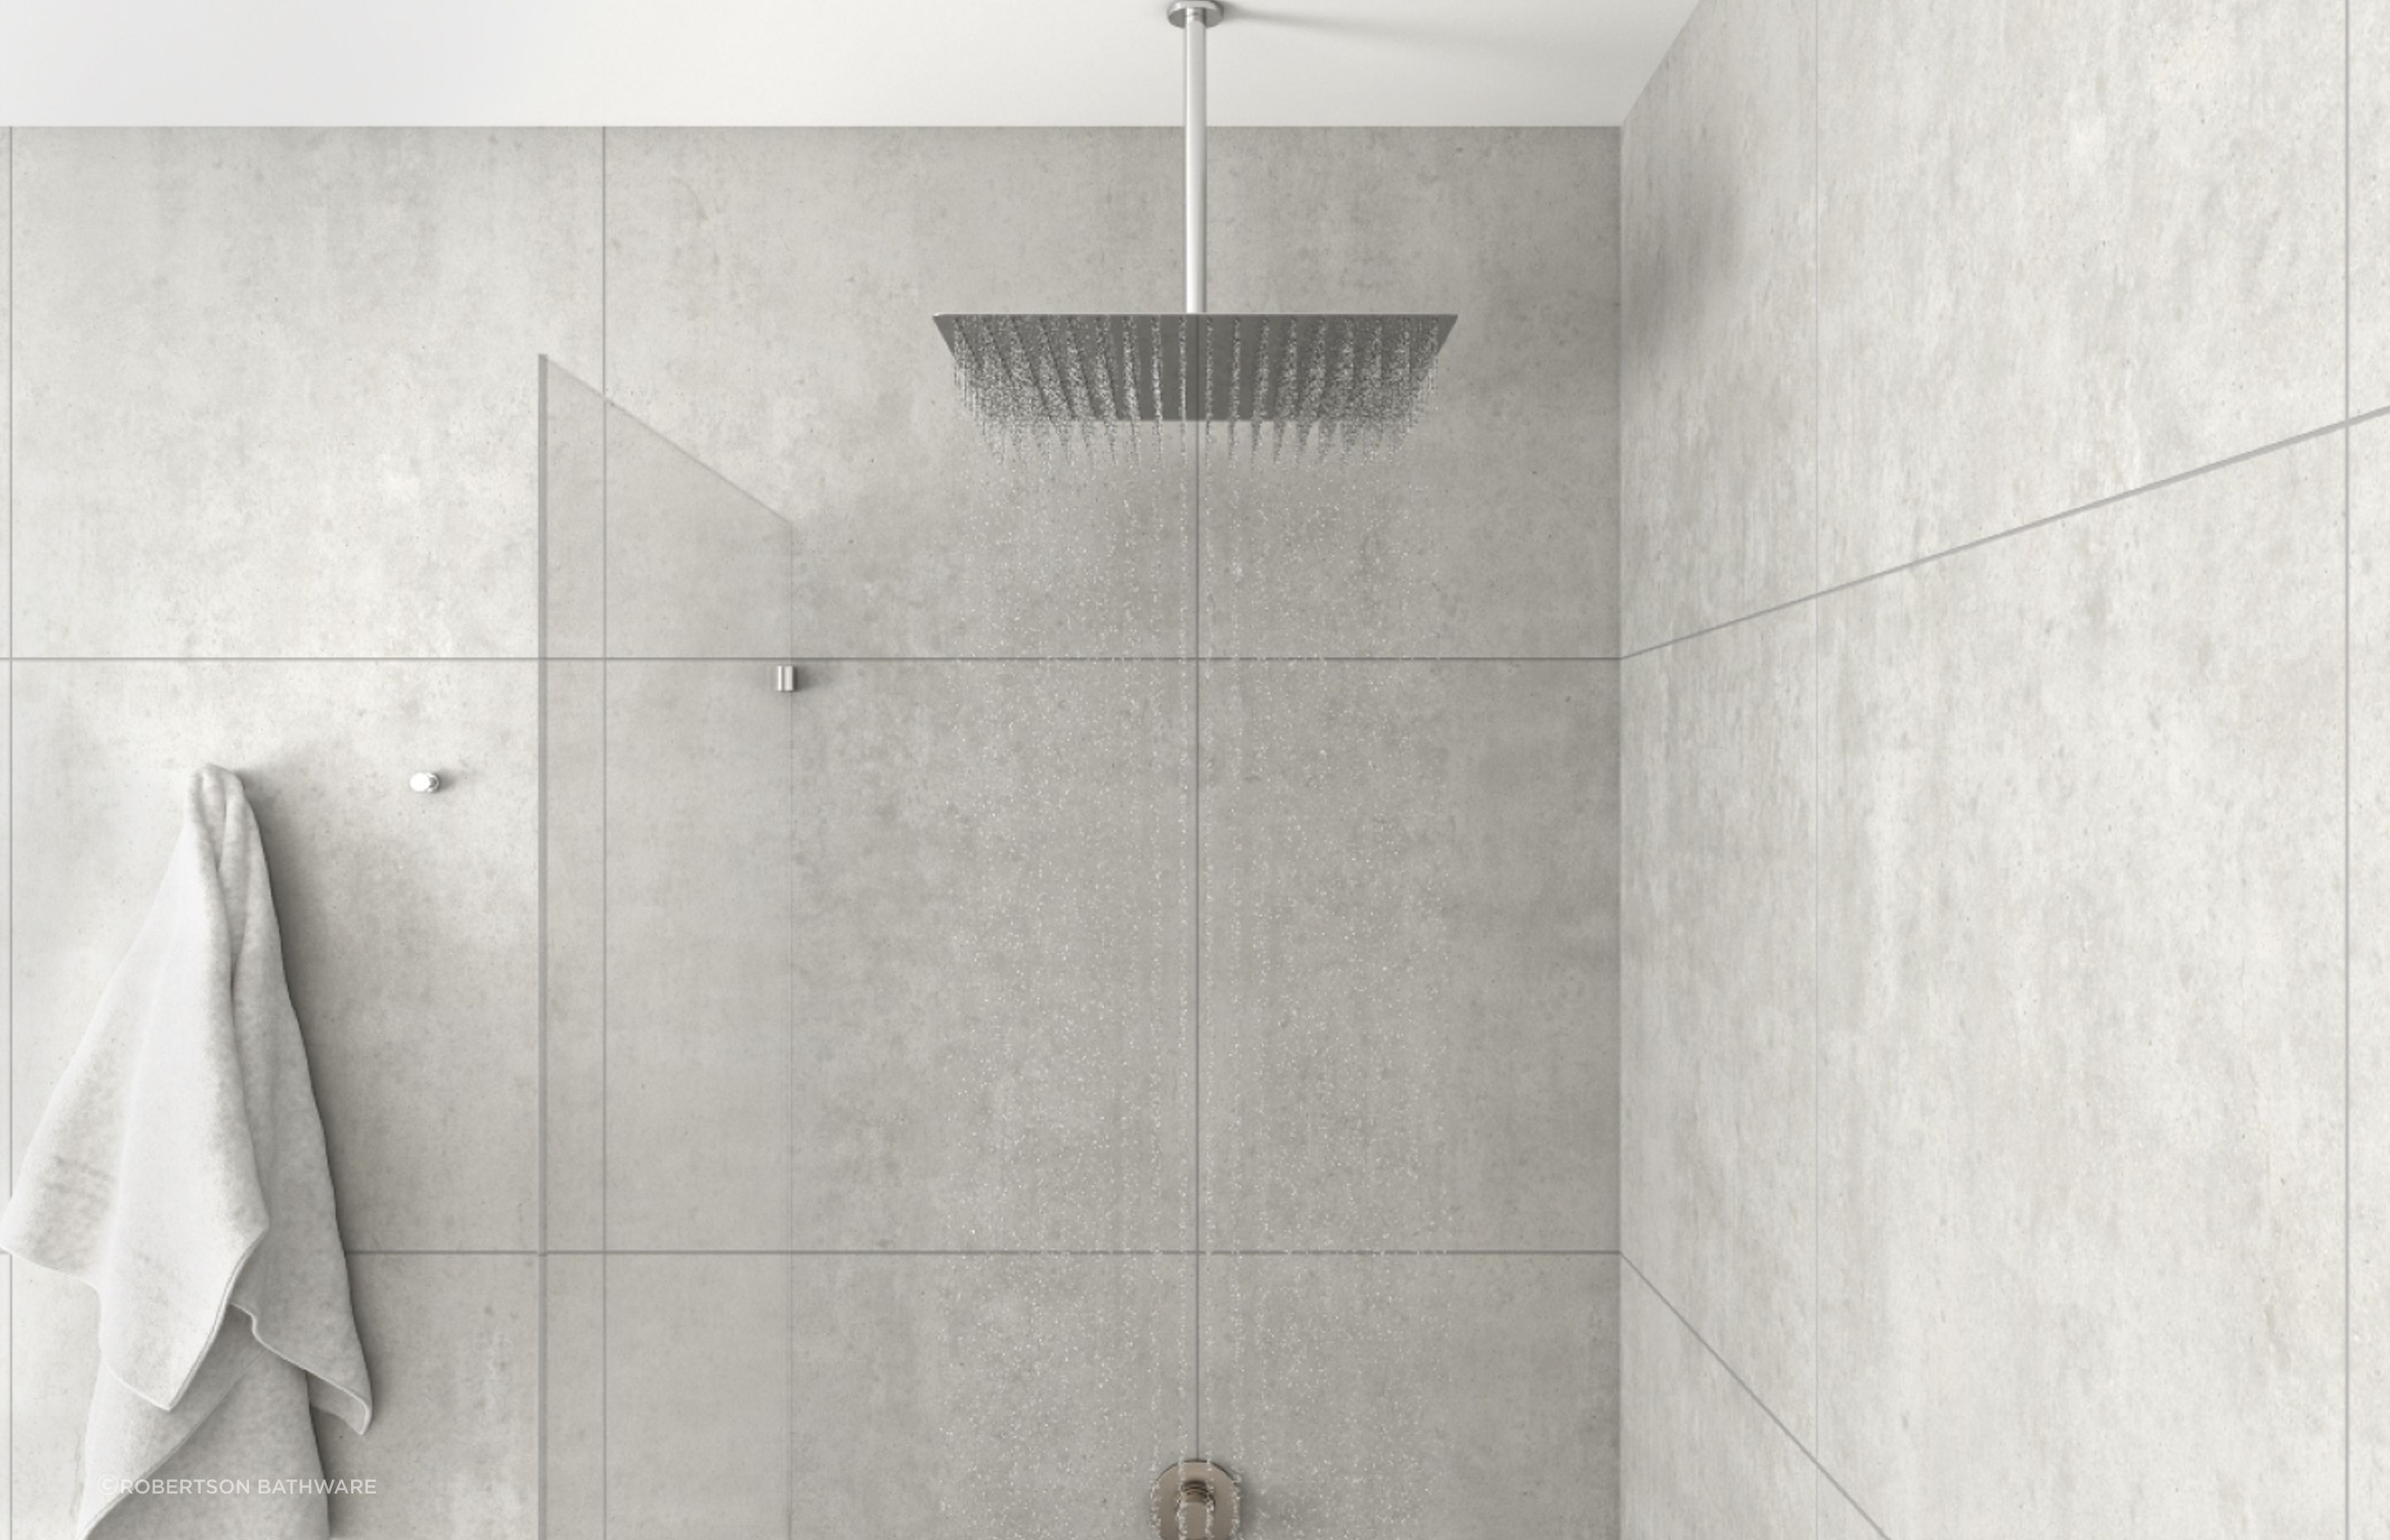 The rainfall shower head of the Elementi Vibrant Showers offers great coverage in a sleek design that is only 2mm thick.